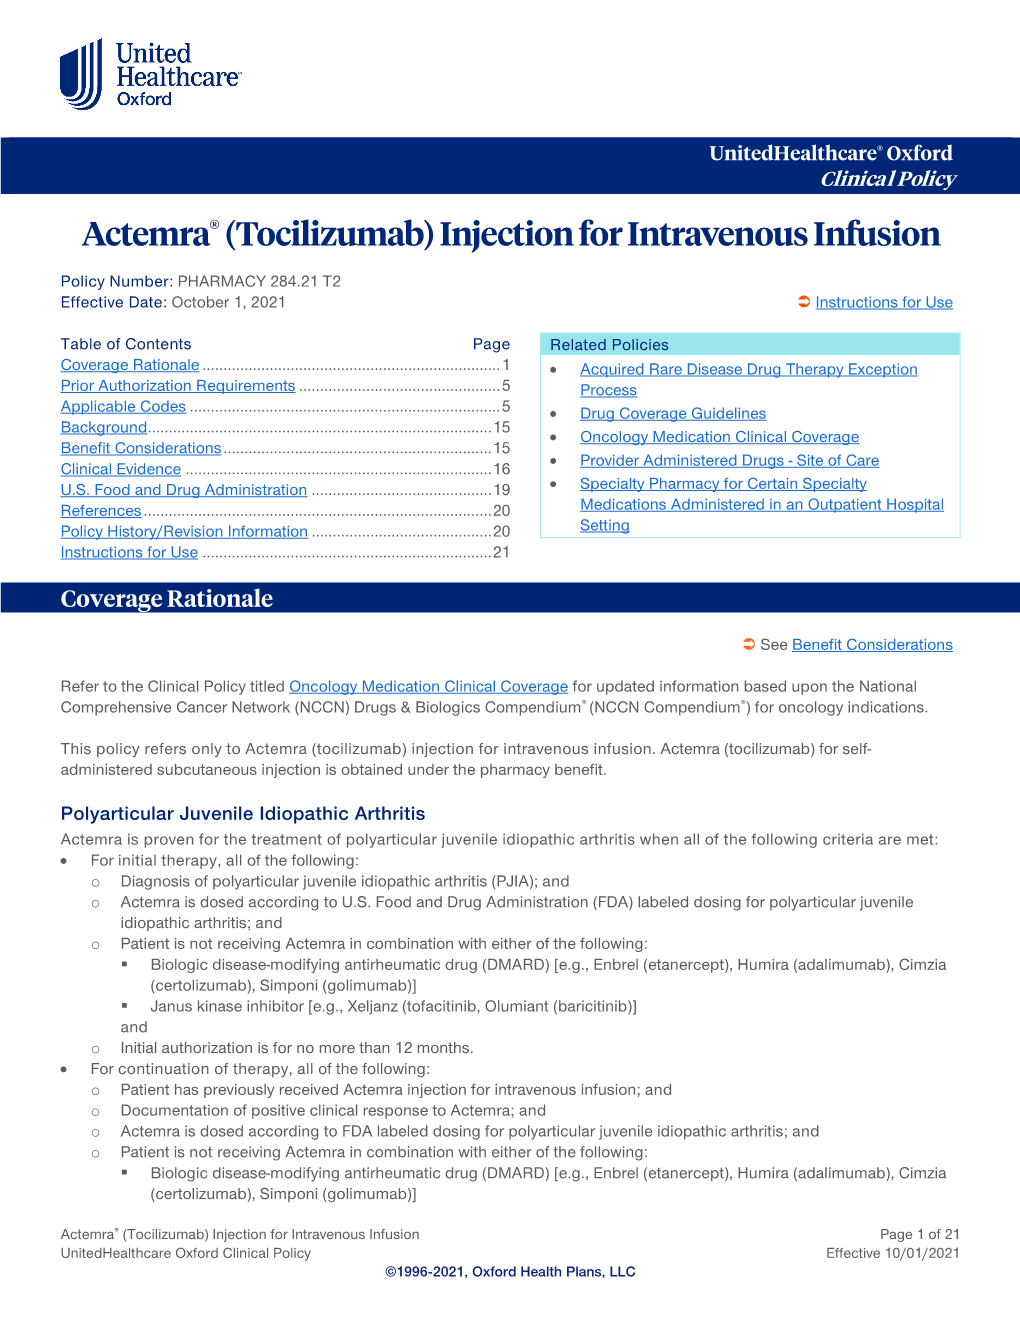 Actemra® (Tocilizumab) Injection for Intravenous Infusion